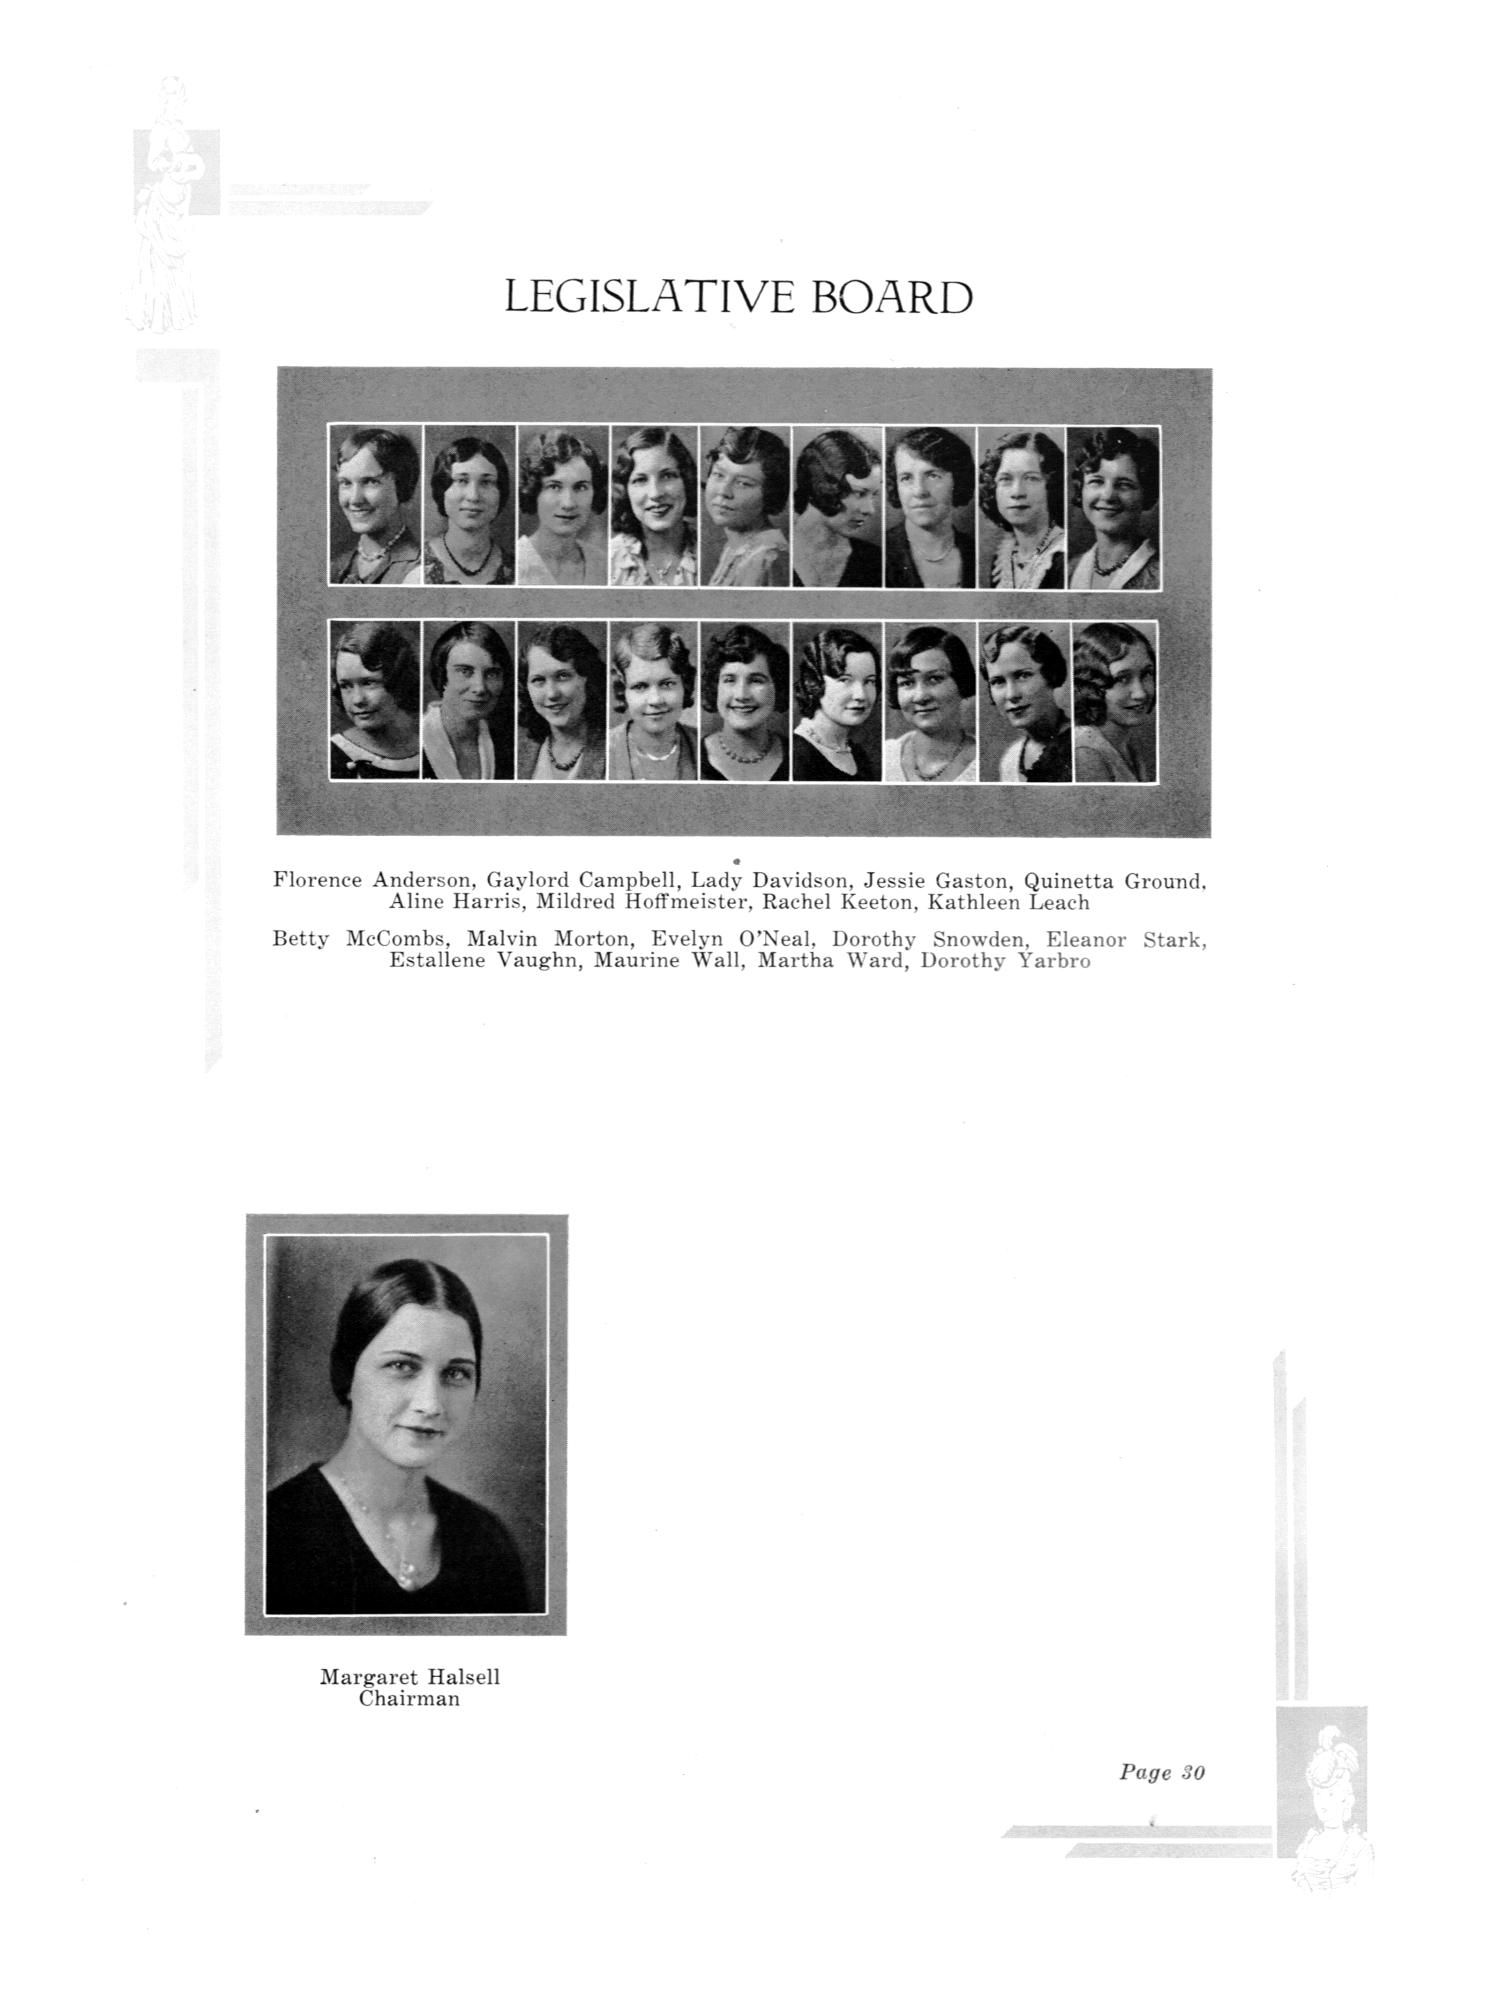 TXWOCO, Yearbook of Texas Woman's College, 1931
                                                
                                                    30
                                                